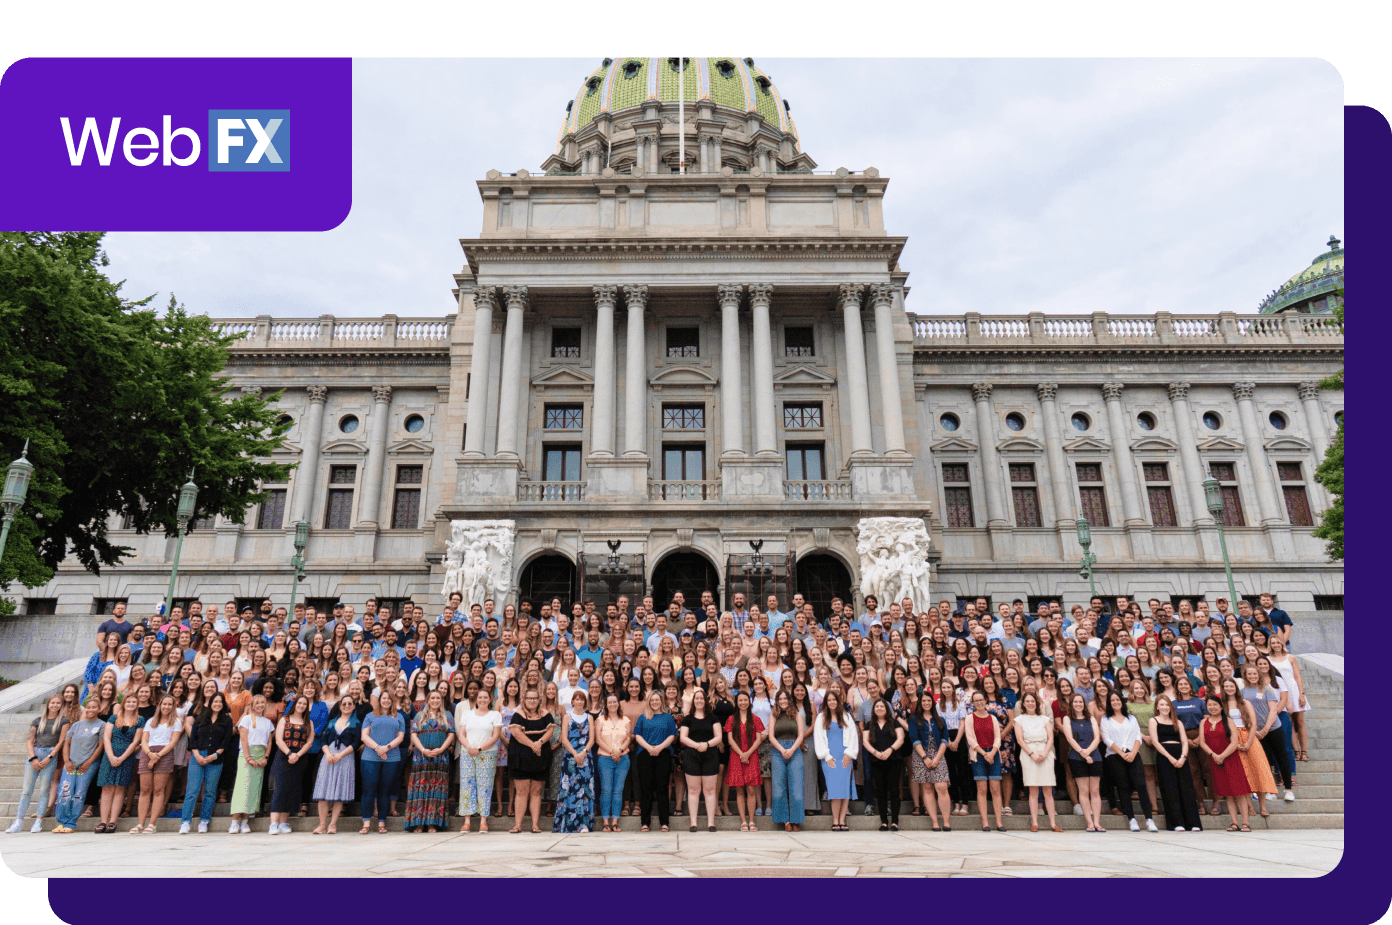 Large group photo in front of a capitol building, WebFX logo in corner